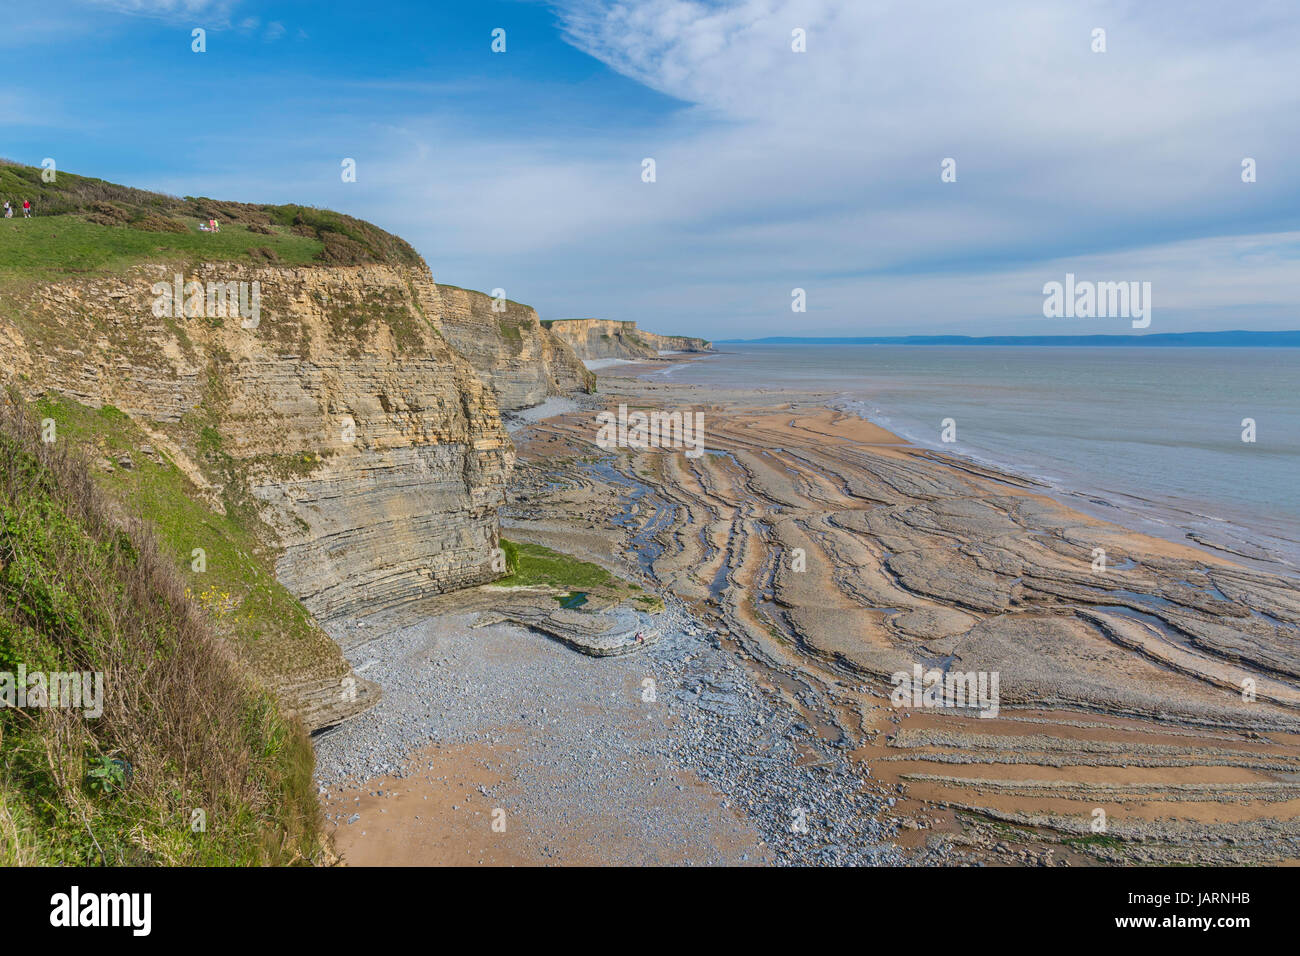 Sea cliff and wave cut platform details at the shore line in South Wales-UK. Stock Photo